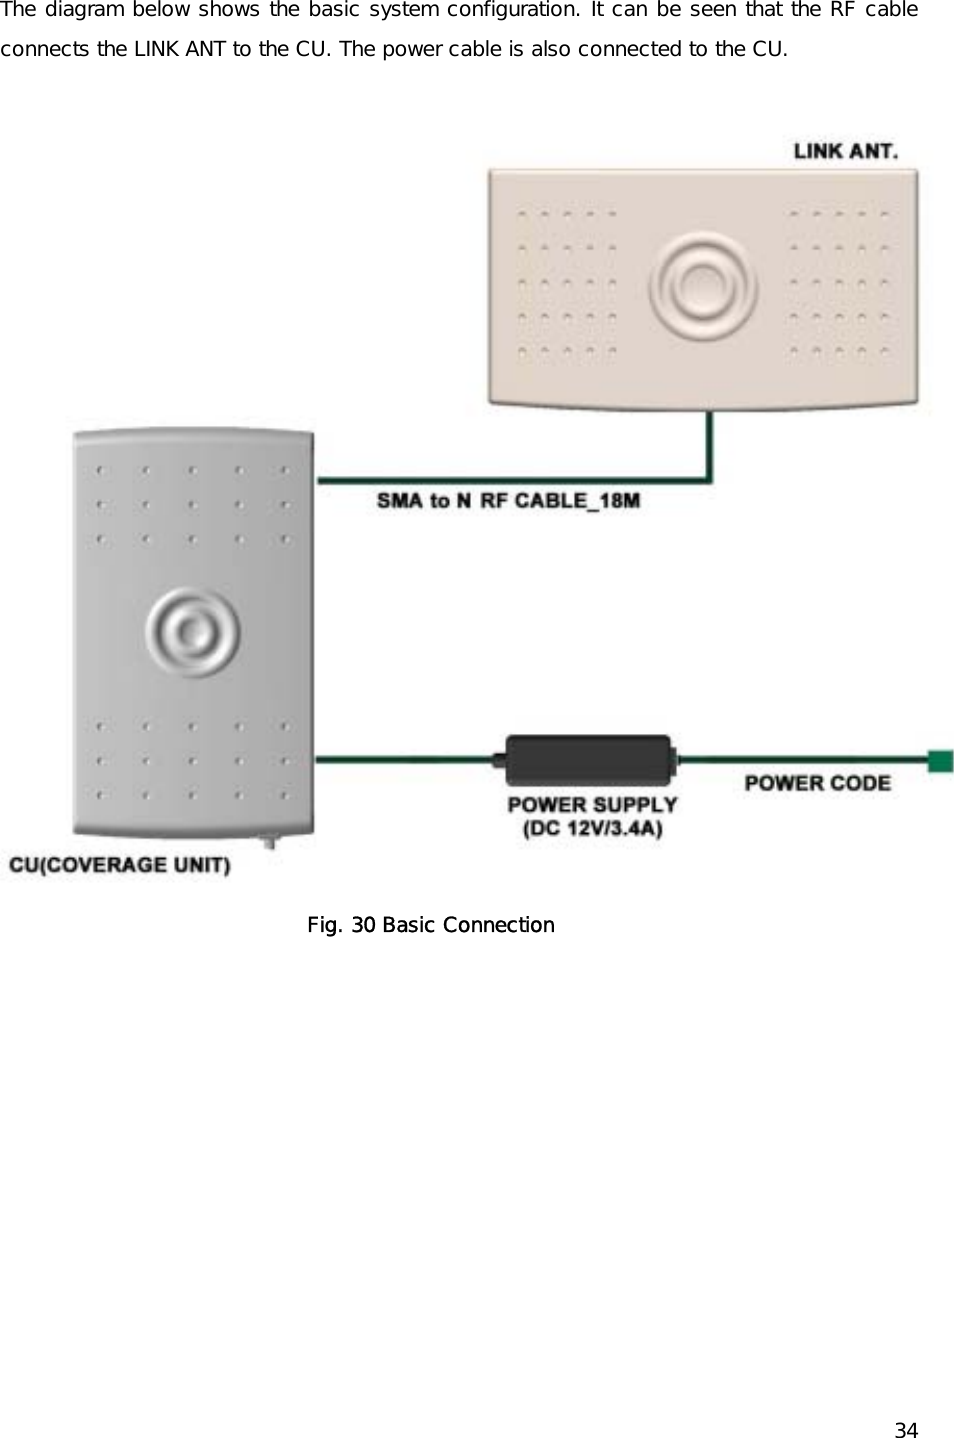   34 The diagram below shows the basic system configuration. It can be seen that the RF cable connects the LINK ANT to the CU. The power cable is also connected to the CU.   Fig. 30 Basic Connection 